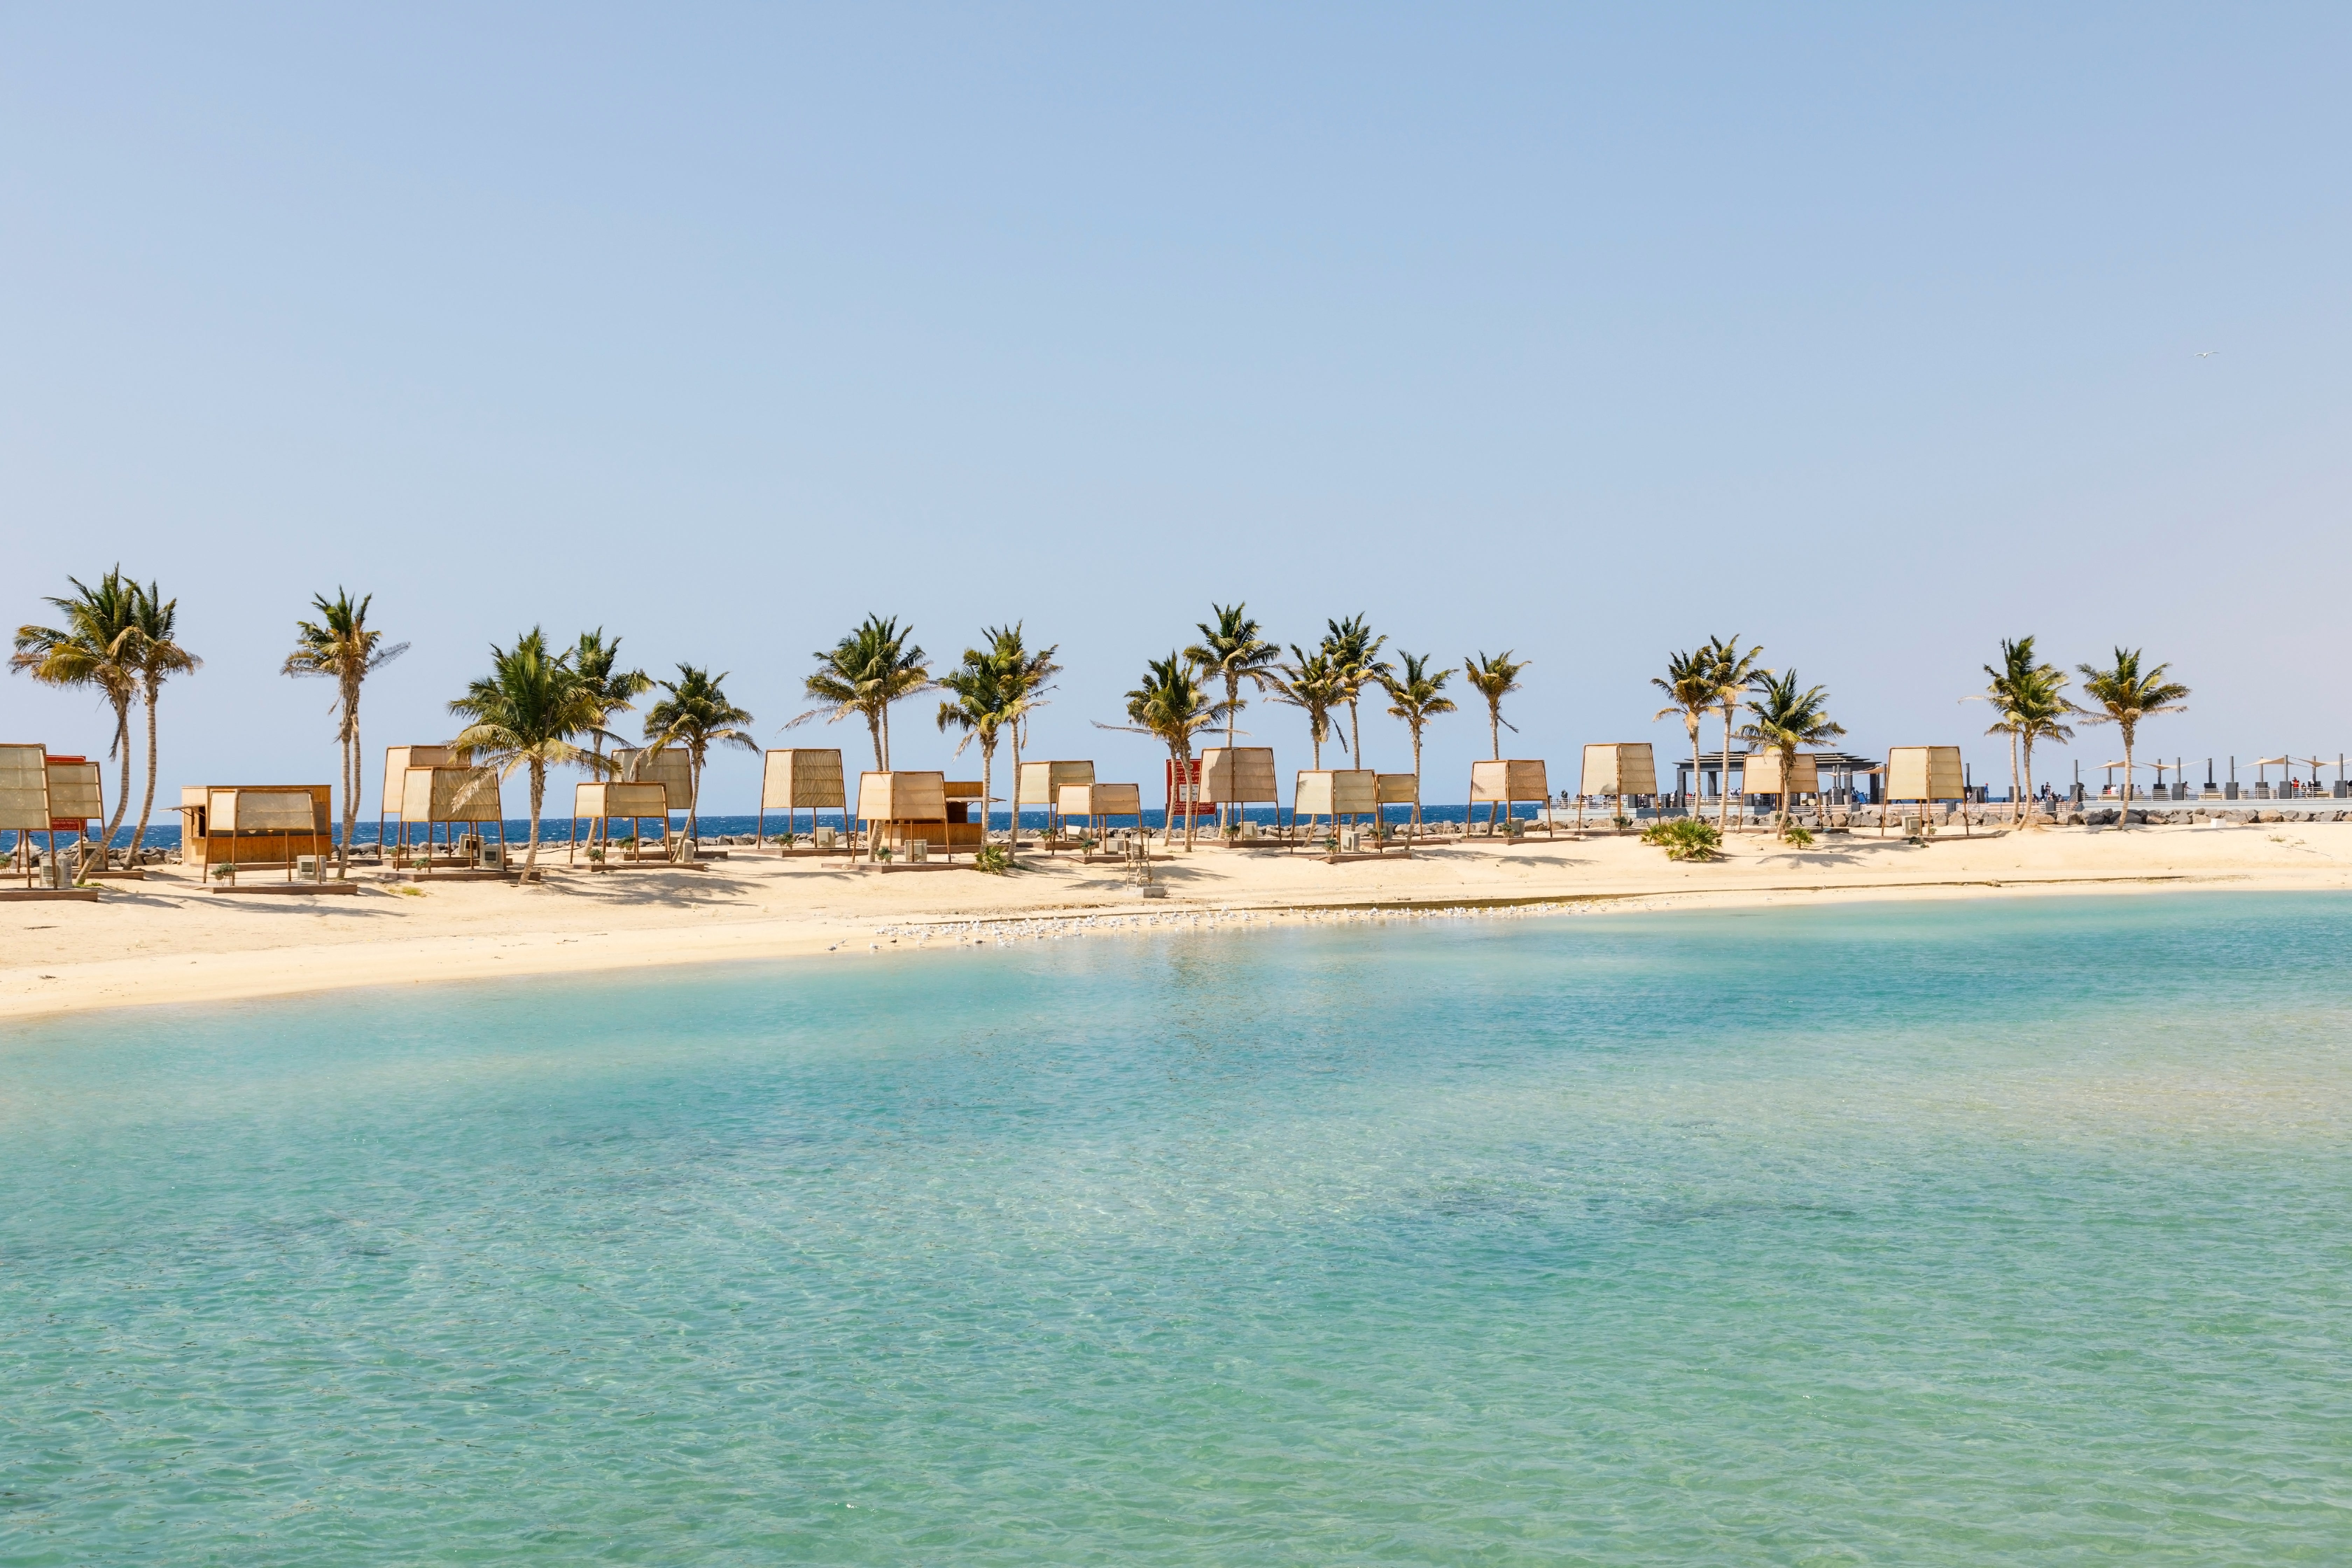 The white beaches and crystalline waters of Saudi are a travel paradise